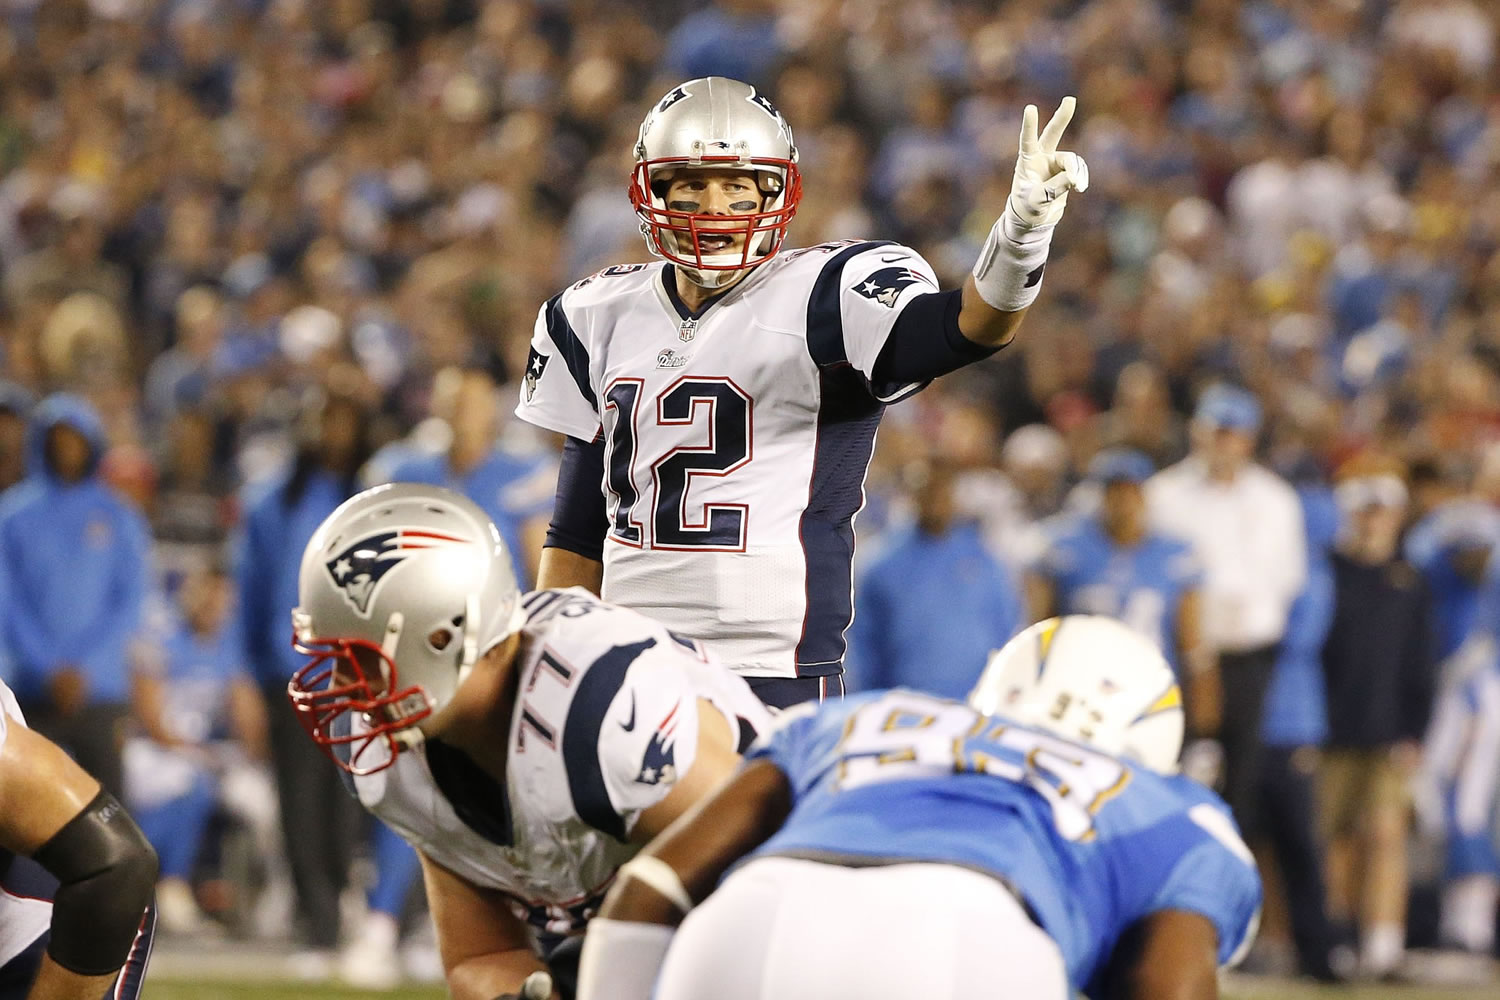 New England Patriots quarterback Tom Brady motions while playing the San Diego Chargers during the first half Sunday, Dec. 7, 2014, in San Diego.